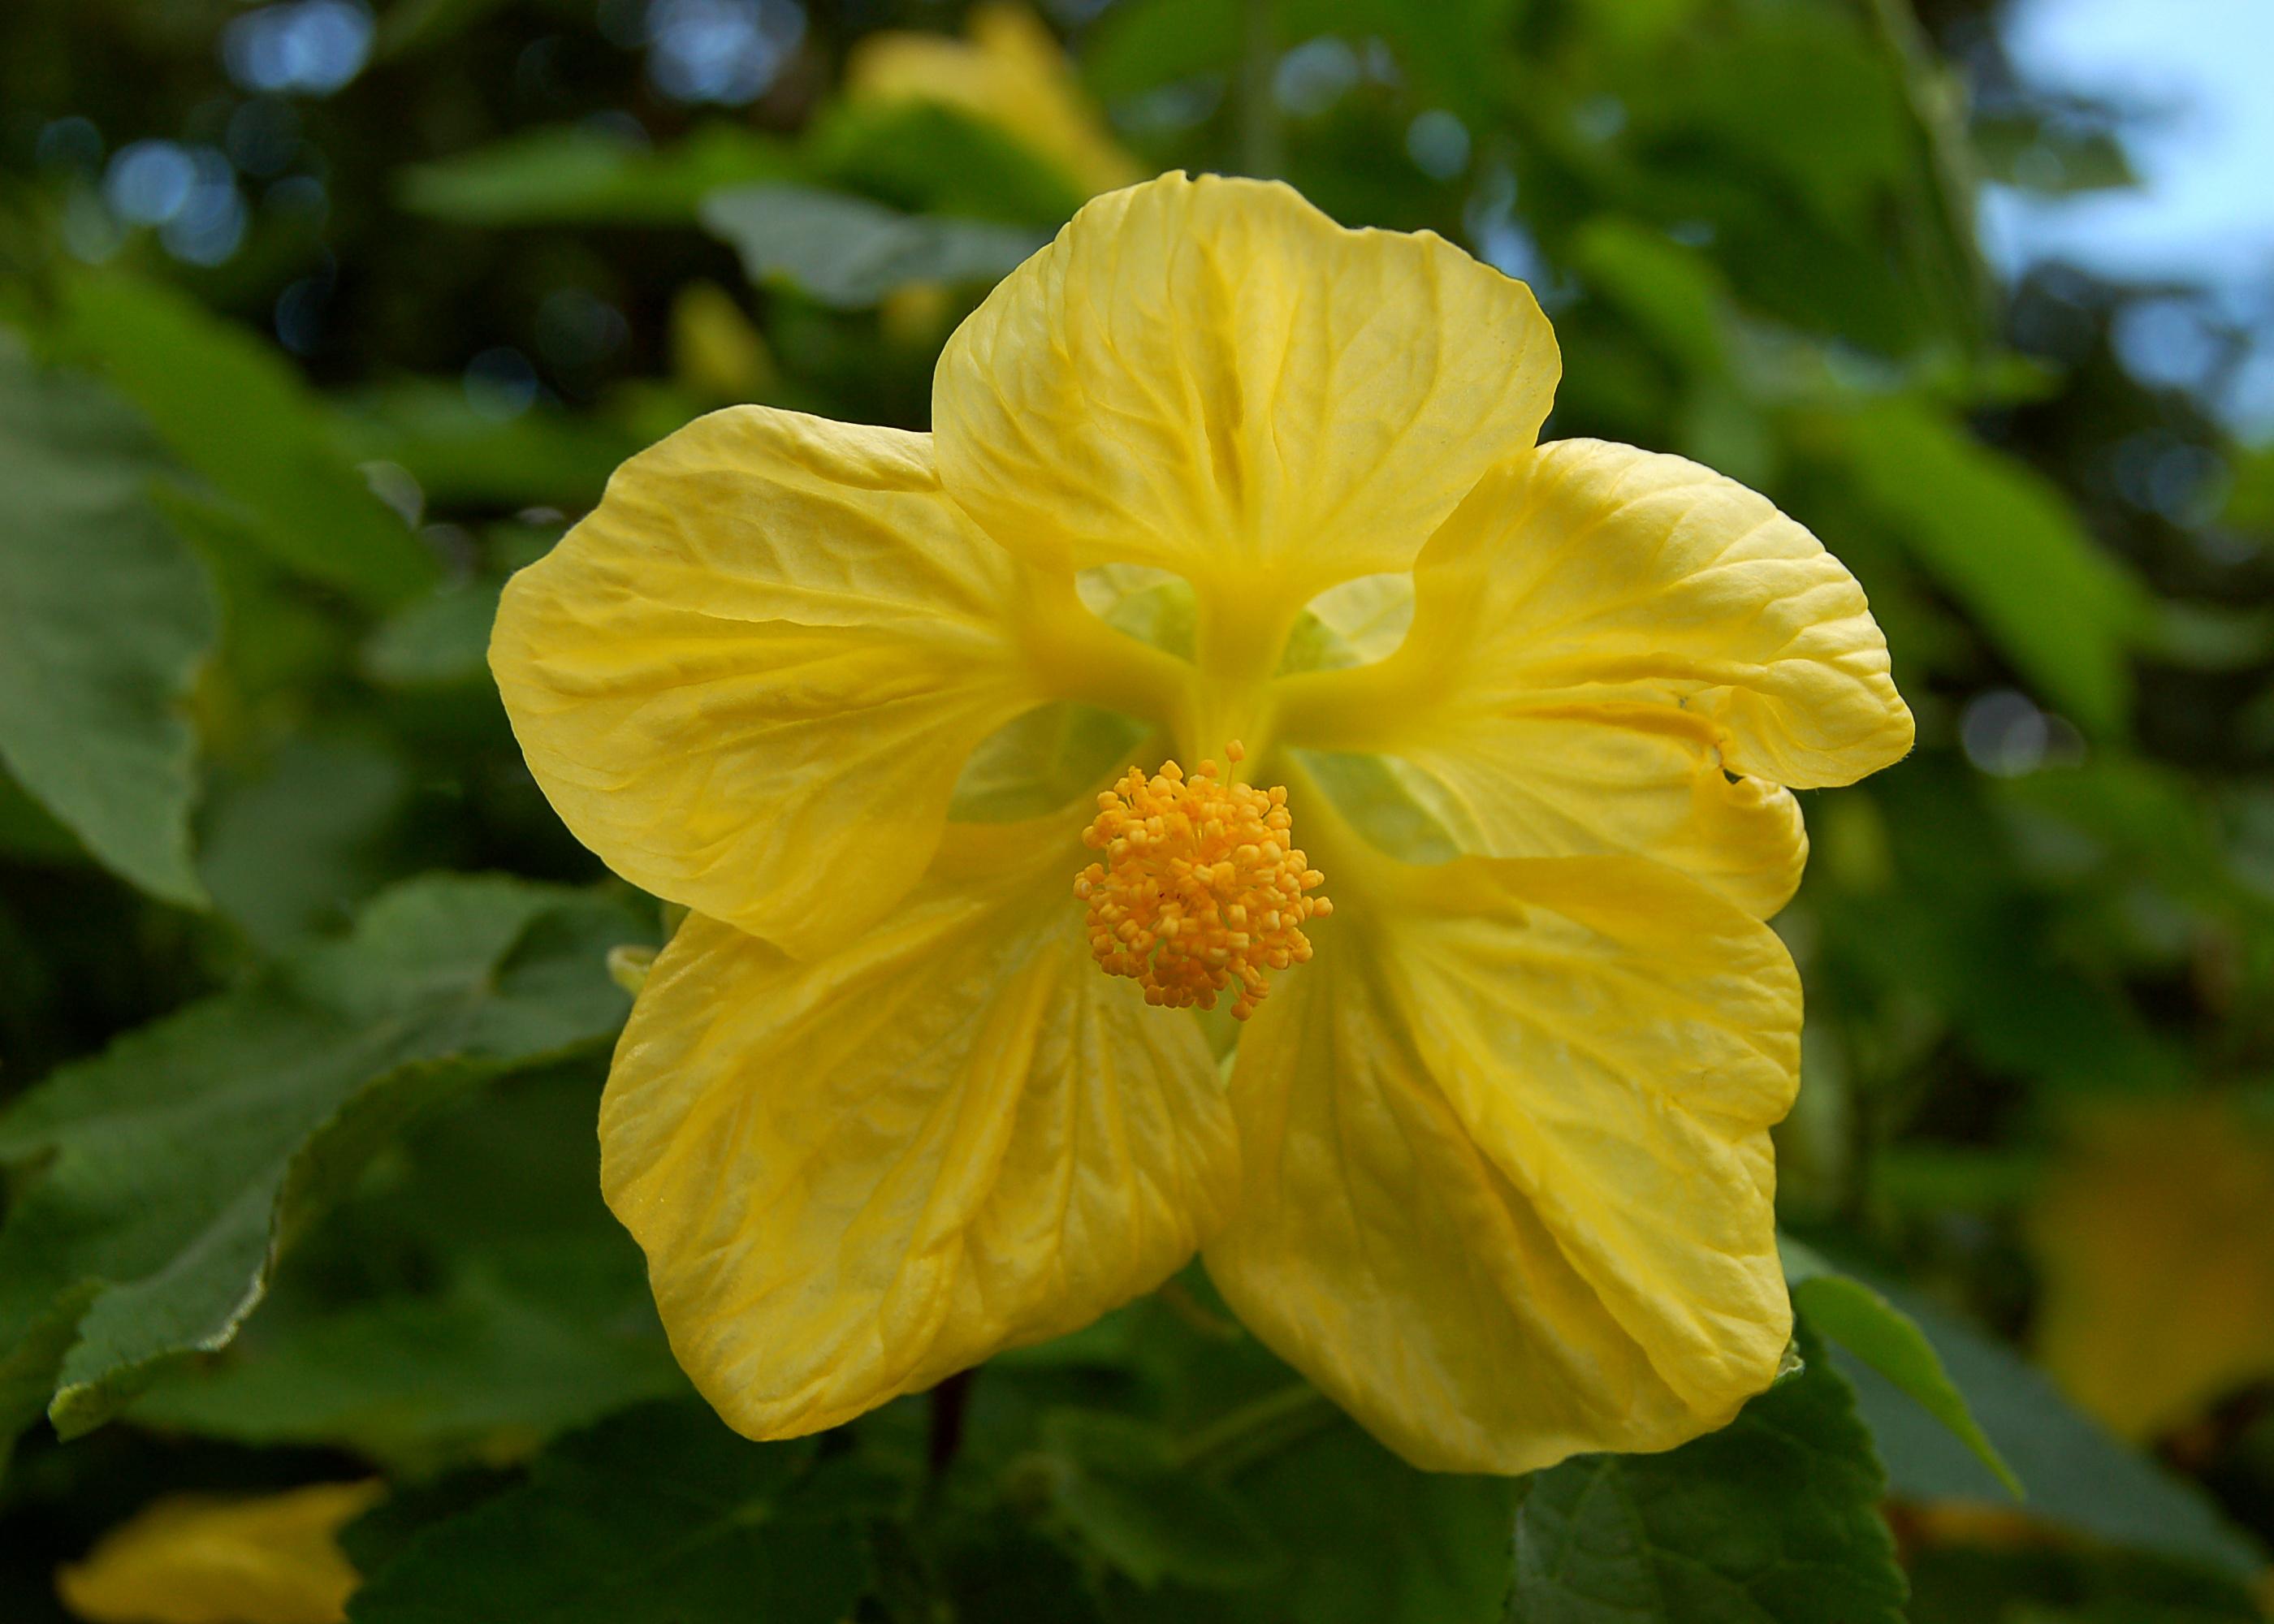 a yellow flower with a light-orange center and green leaves